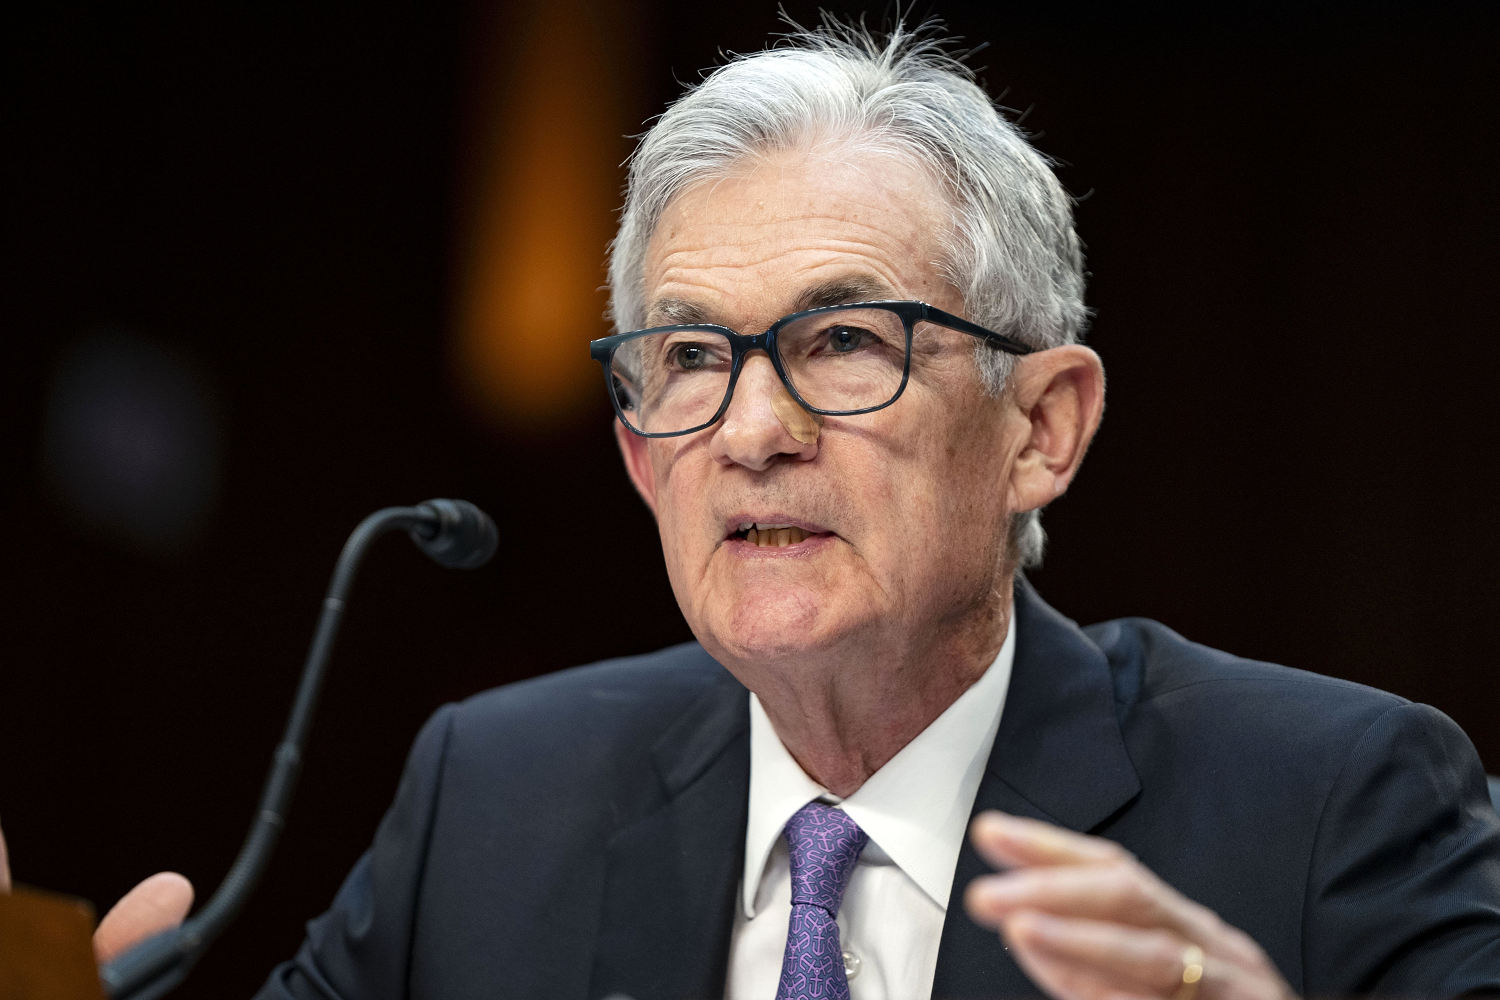 Fed Chair Powell says holding rates high for too long could jeopardize economic growth